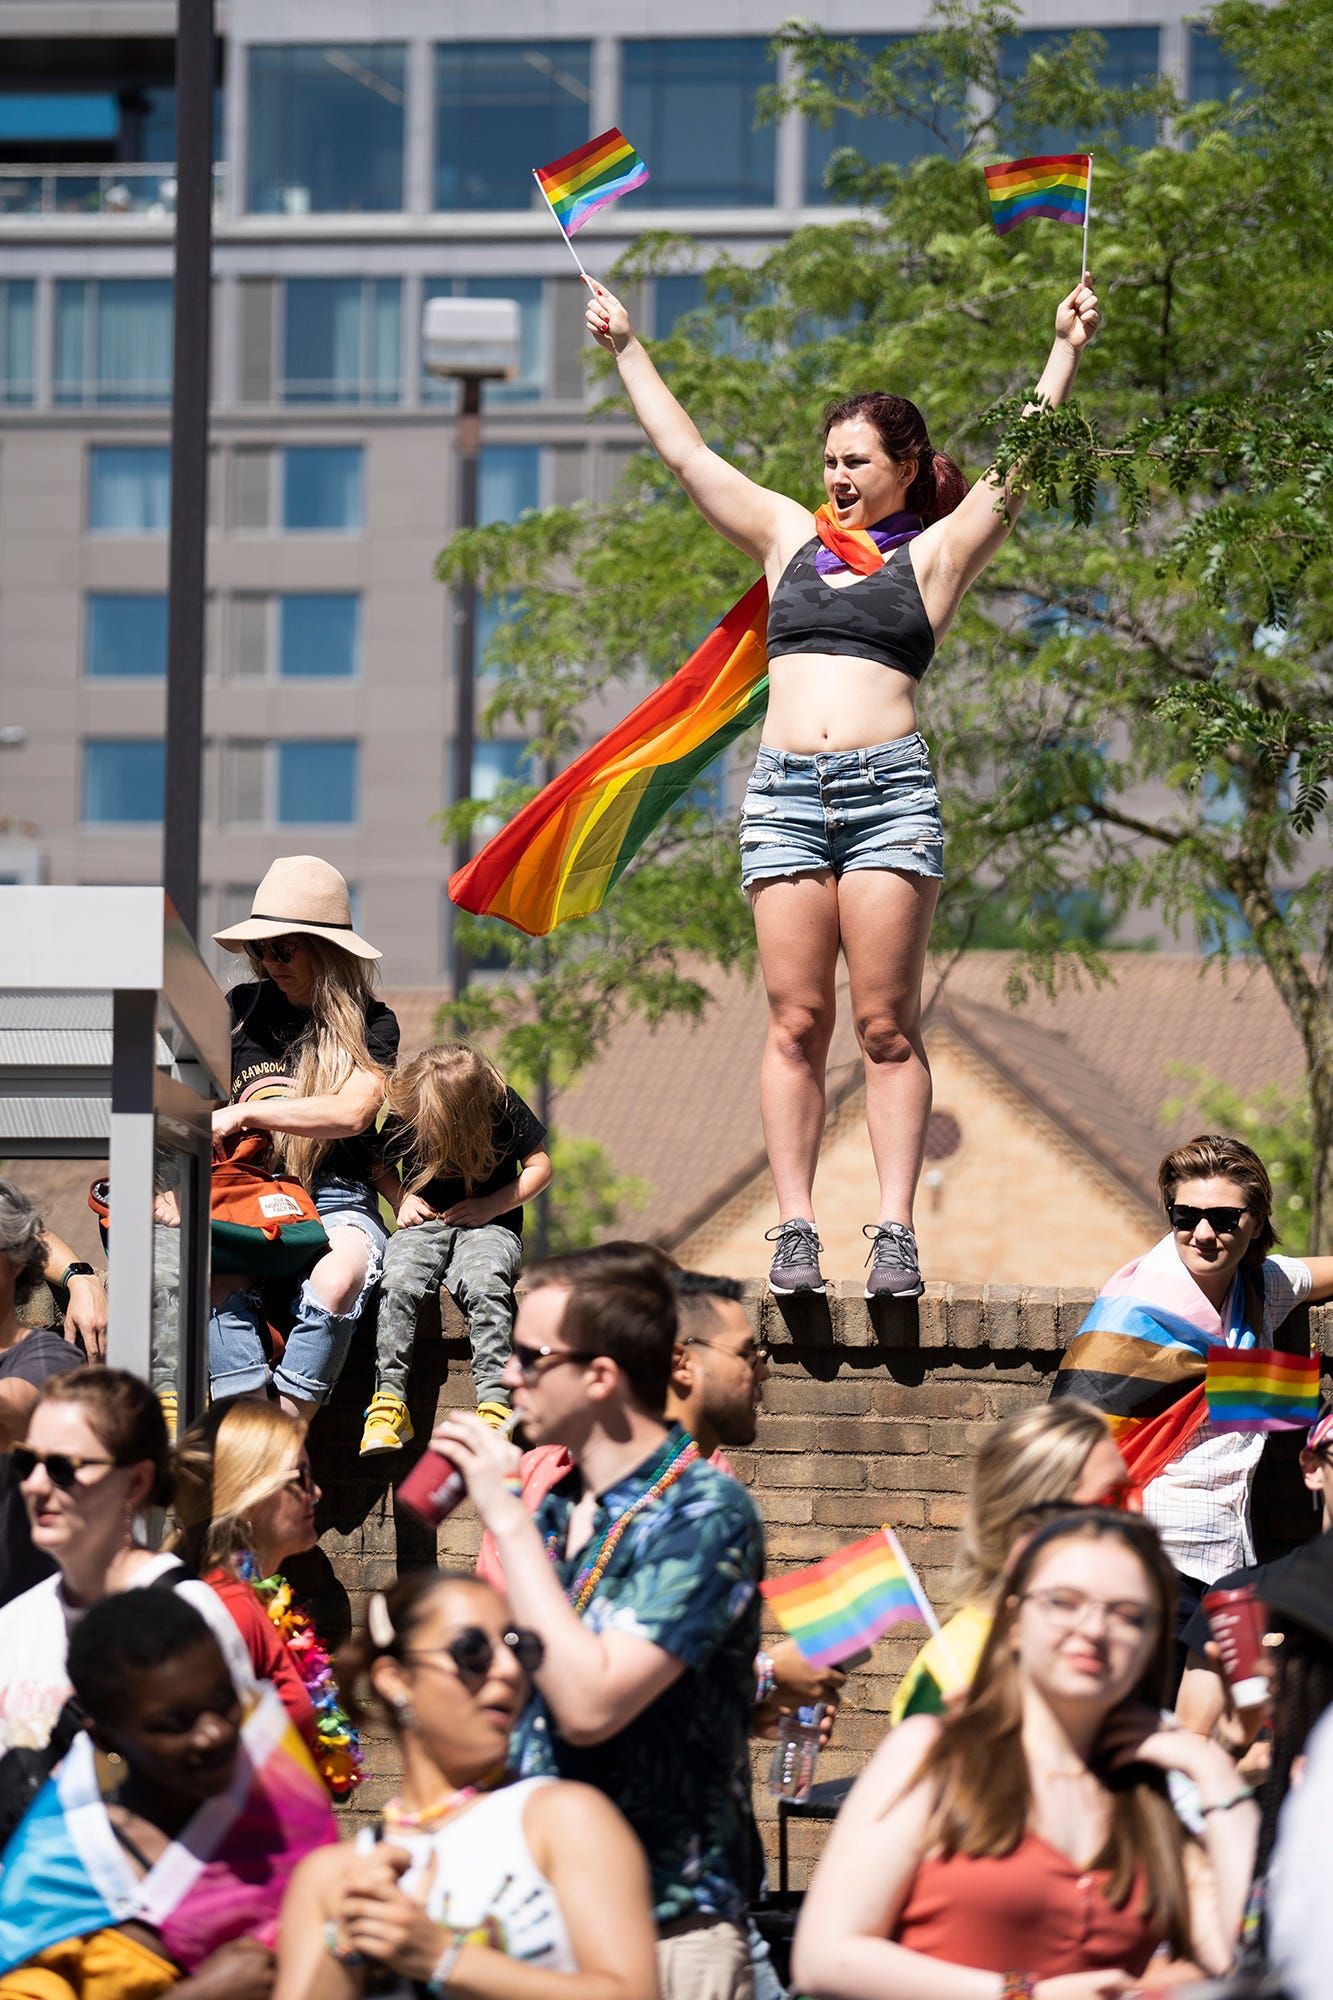 Our favorite photos of Pride and weekend in Columbus, Ohio